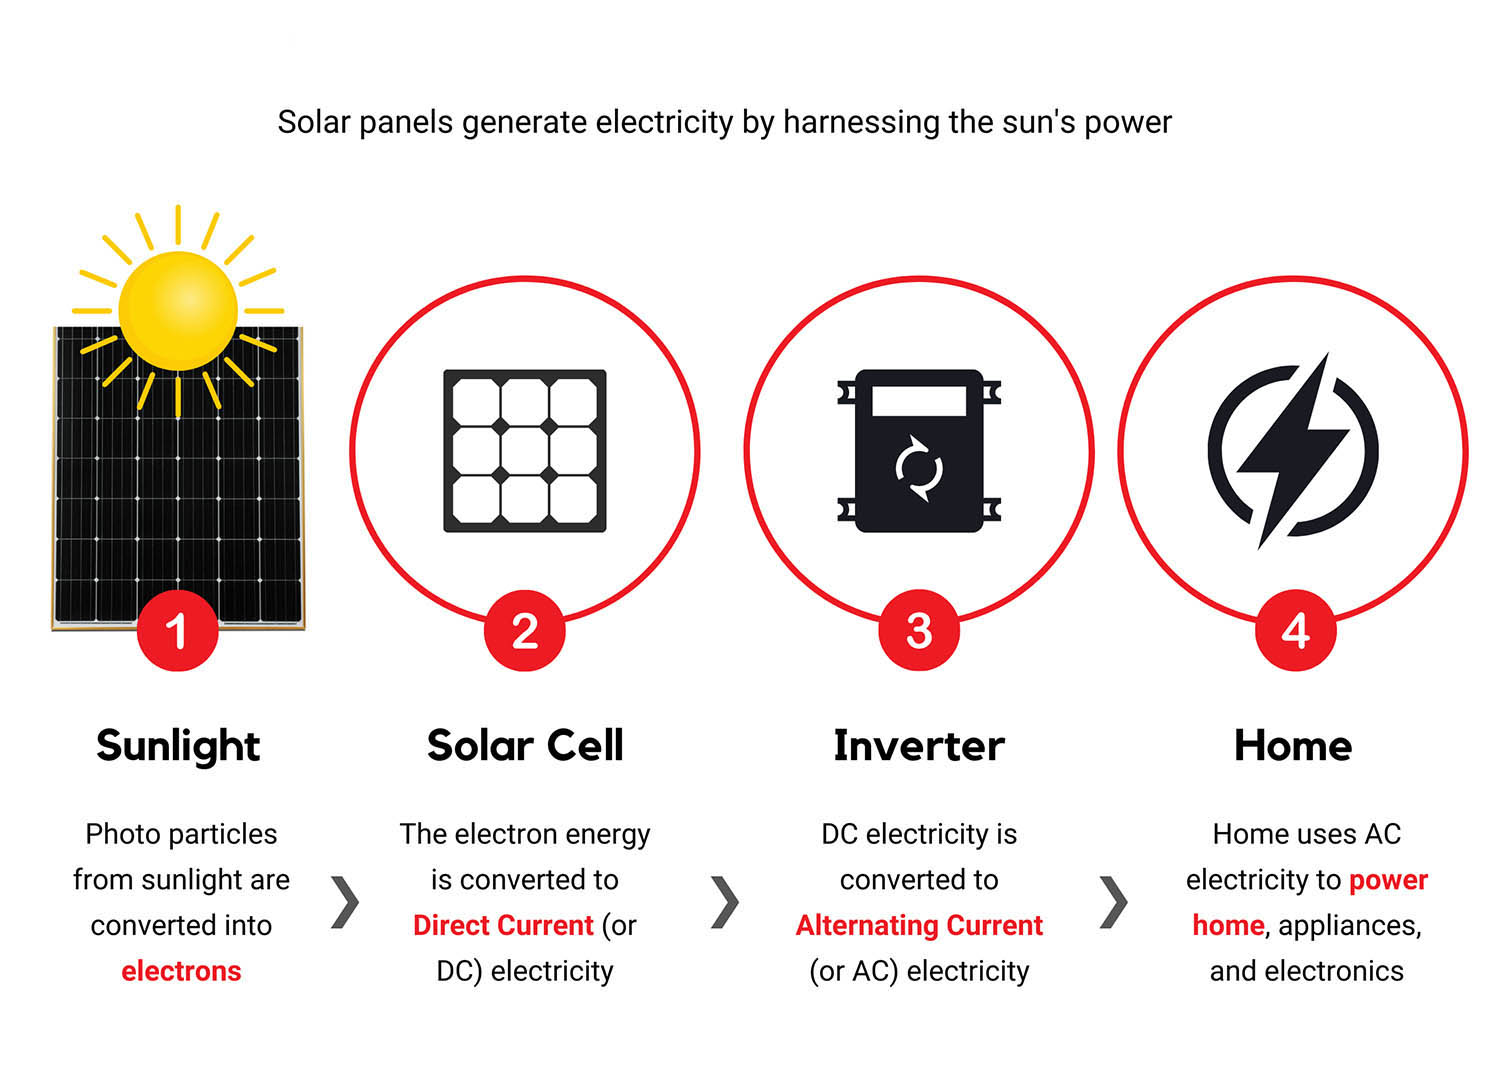 image shows steps that are taken to convert solar energy into usable energy for a home. Step one is sunlight hits the solar panels. Step 2 happens when the electrons within the solar panels are moved due to the sun's energy. Step 3 occurs when the electron movement is converted to AC power. Step 4 is when the inverter converts the AC power to DC power. DC power is what is used to power a home.